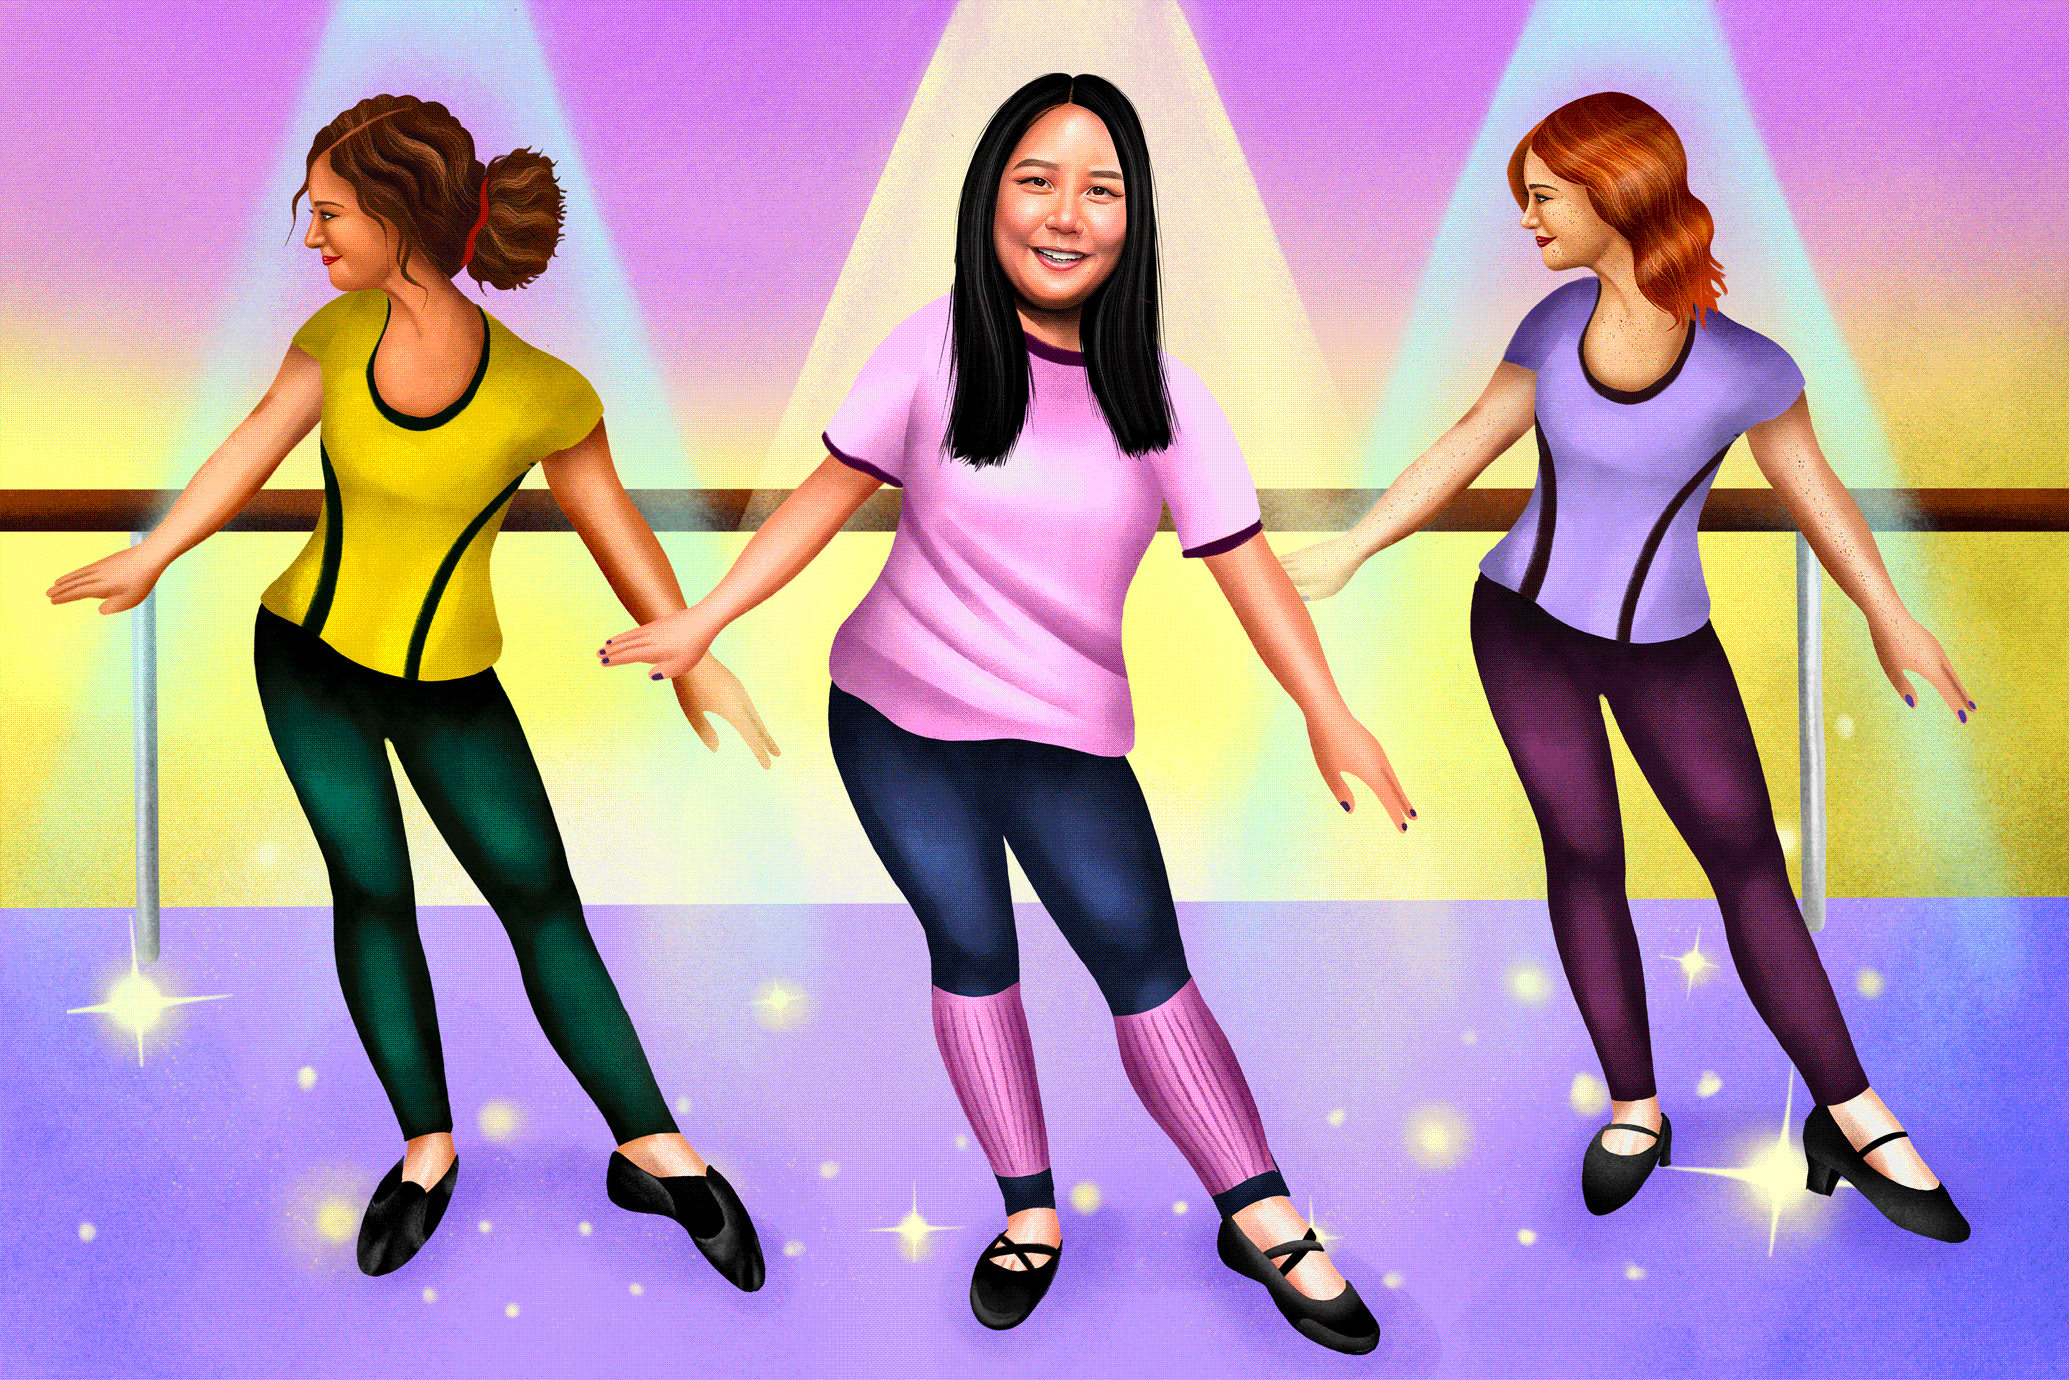 Illustration/gif of a choreographer for a story about how to be a choreographer in Hollywood.